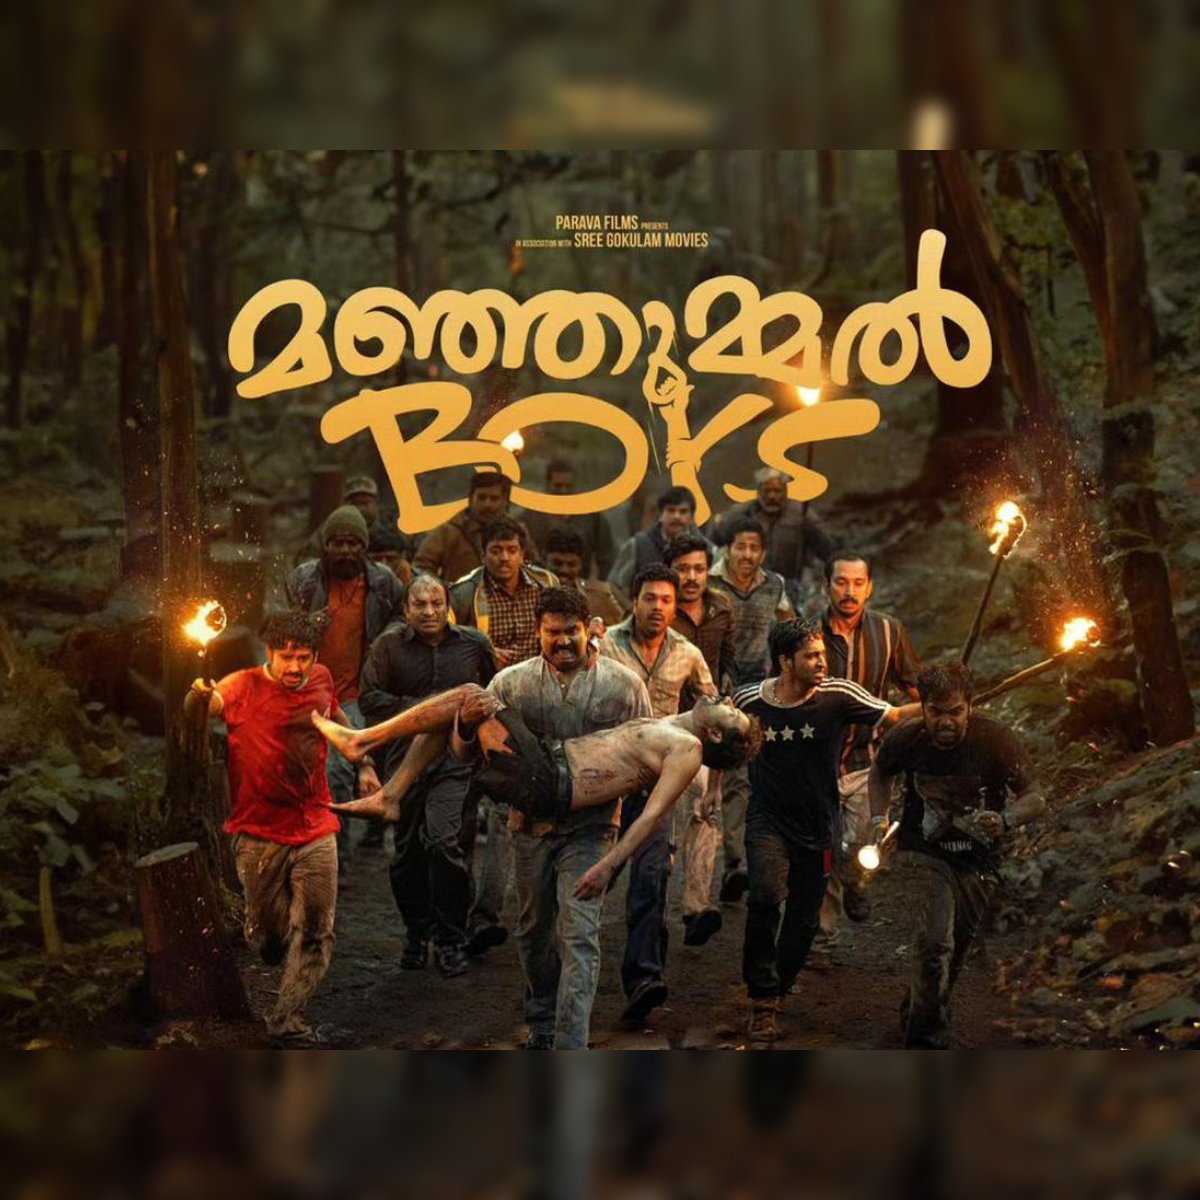 #onemovieperday #movie724 #disneyhotstar #malayalam #manjummelboys Good. Hope importance of following rules & prioritizing safety comes thru. A family friend's teenage daughter died trying to save other girls from drowning.Rescuer dies, risk takers survive.Not able to forget it.